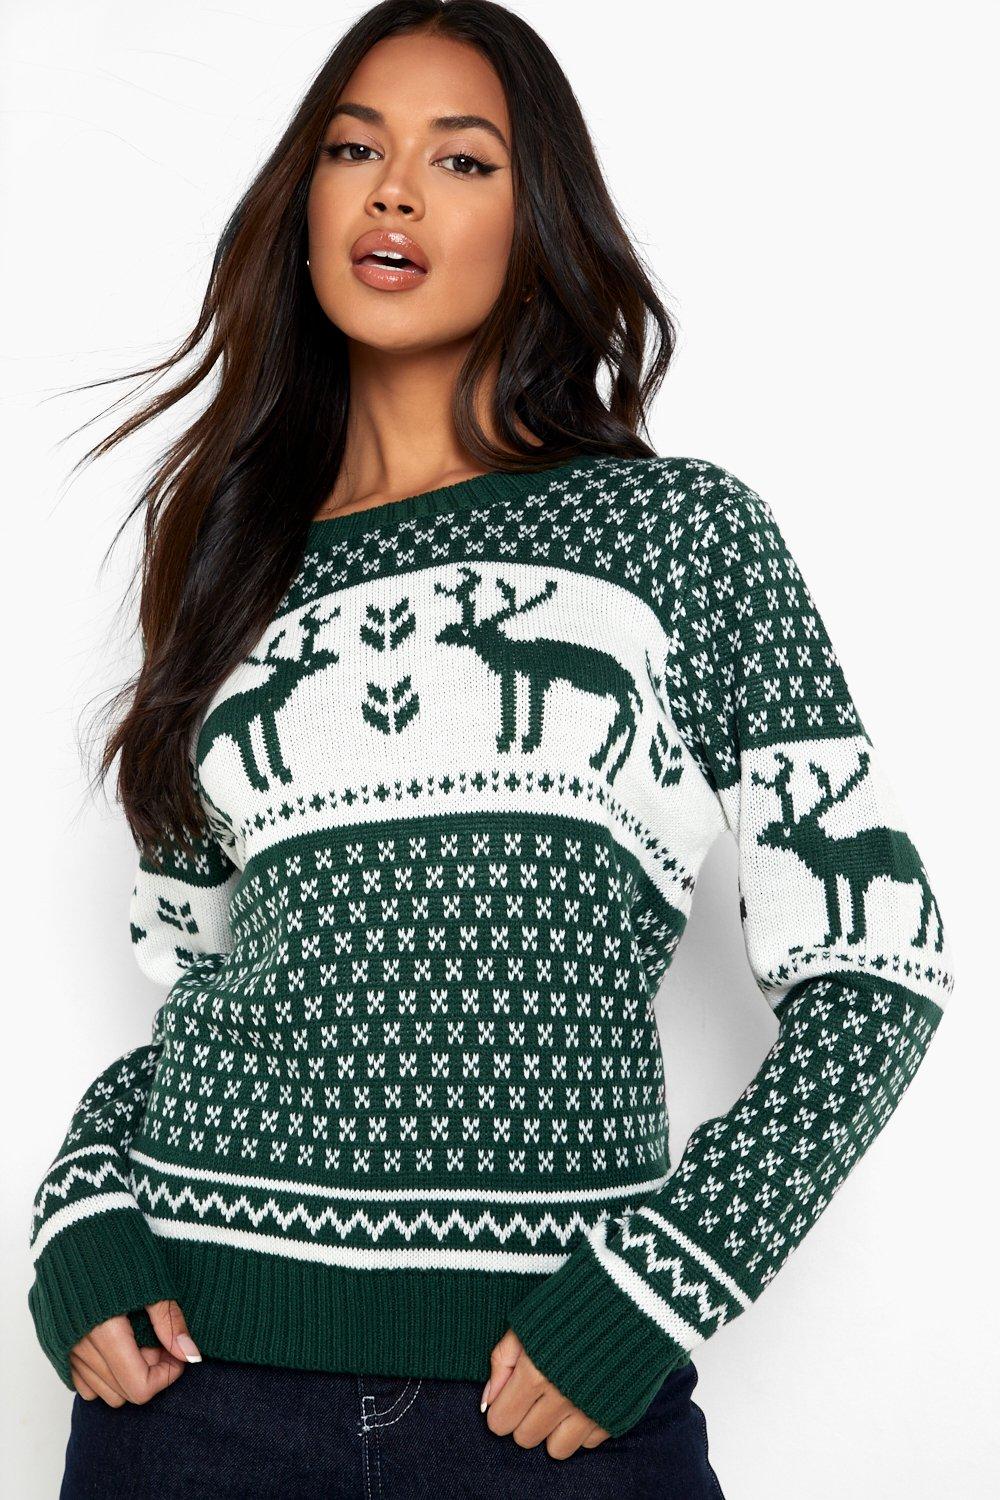 Snowflake And Reindeer Knitted Christmas Sweater